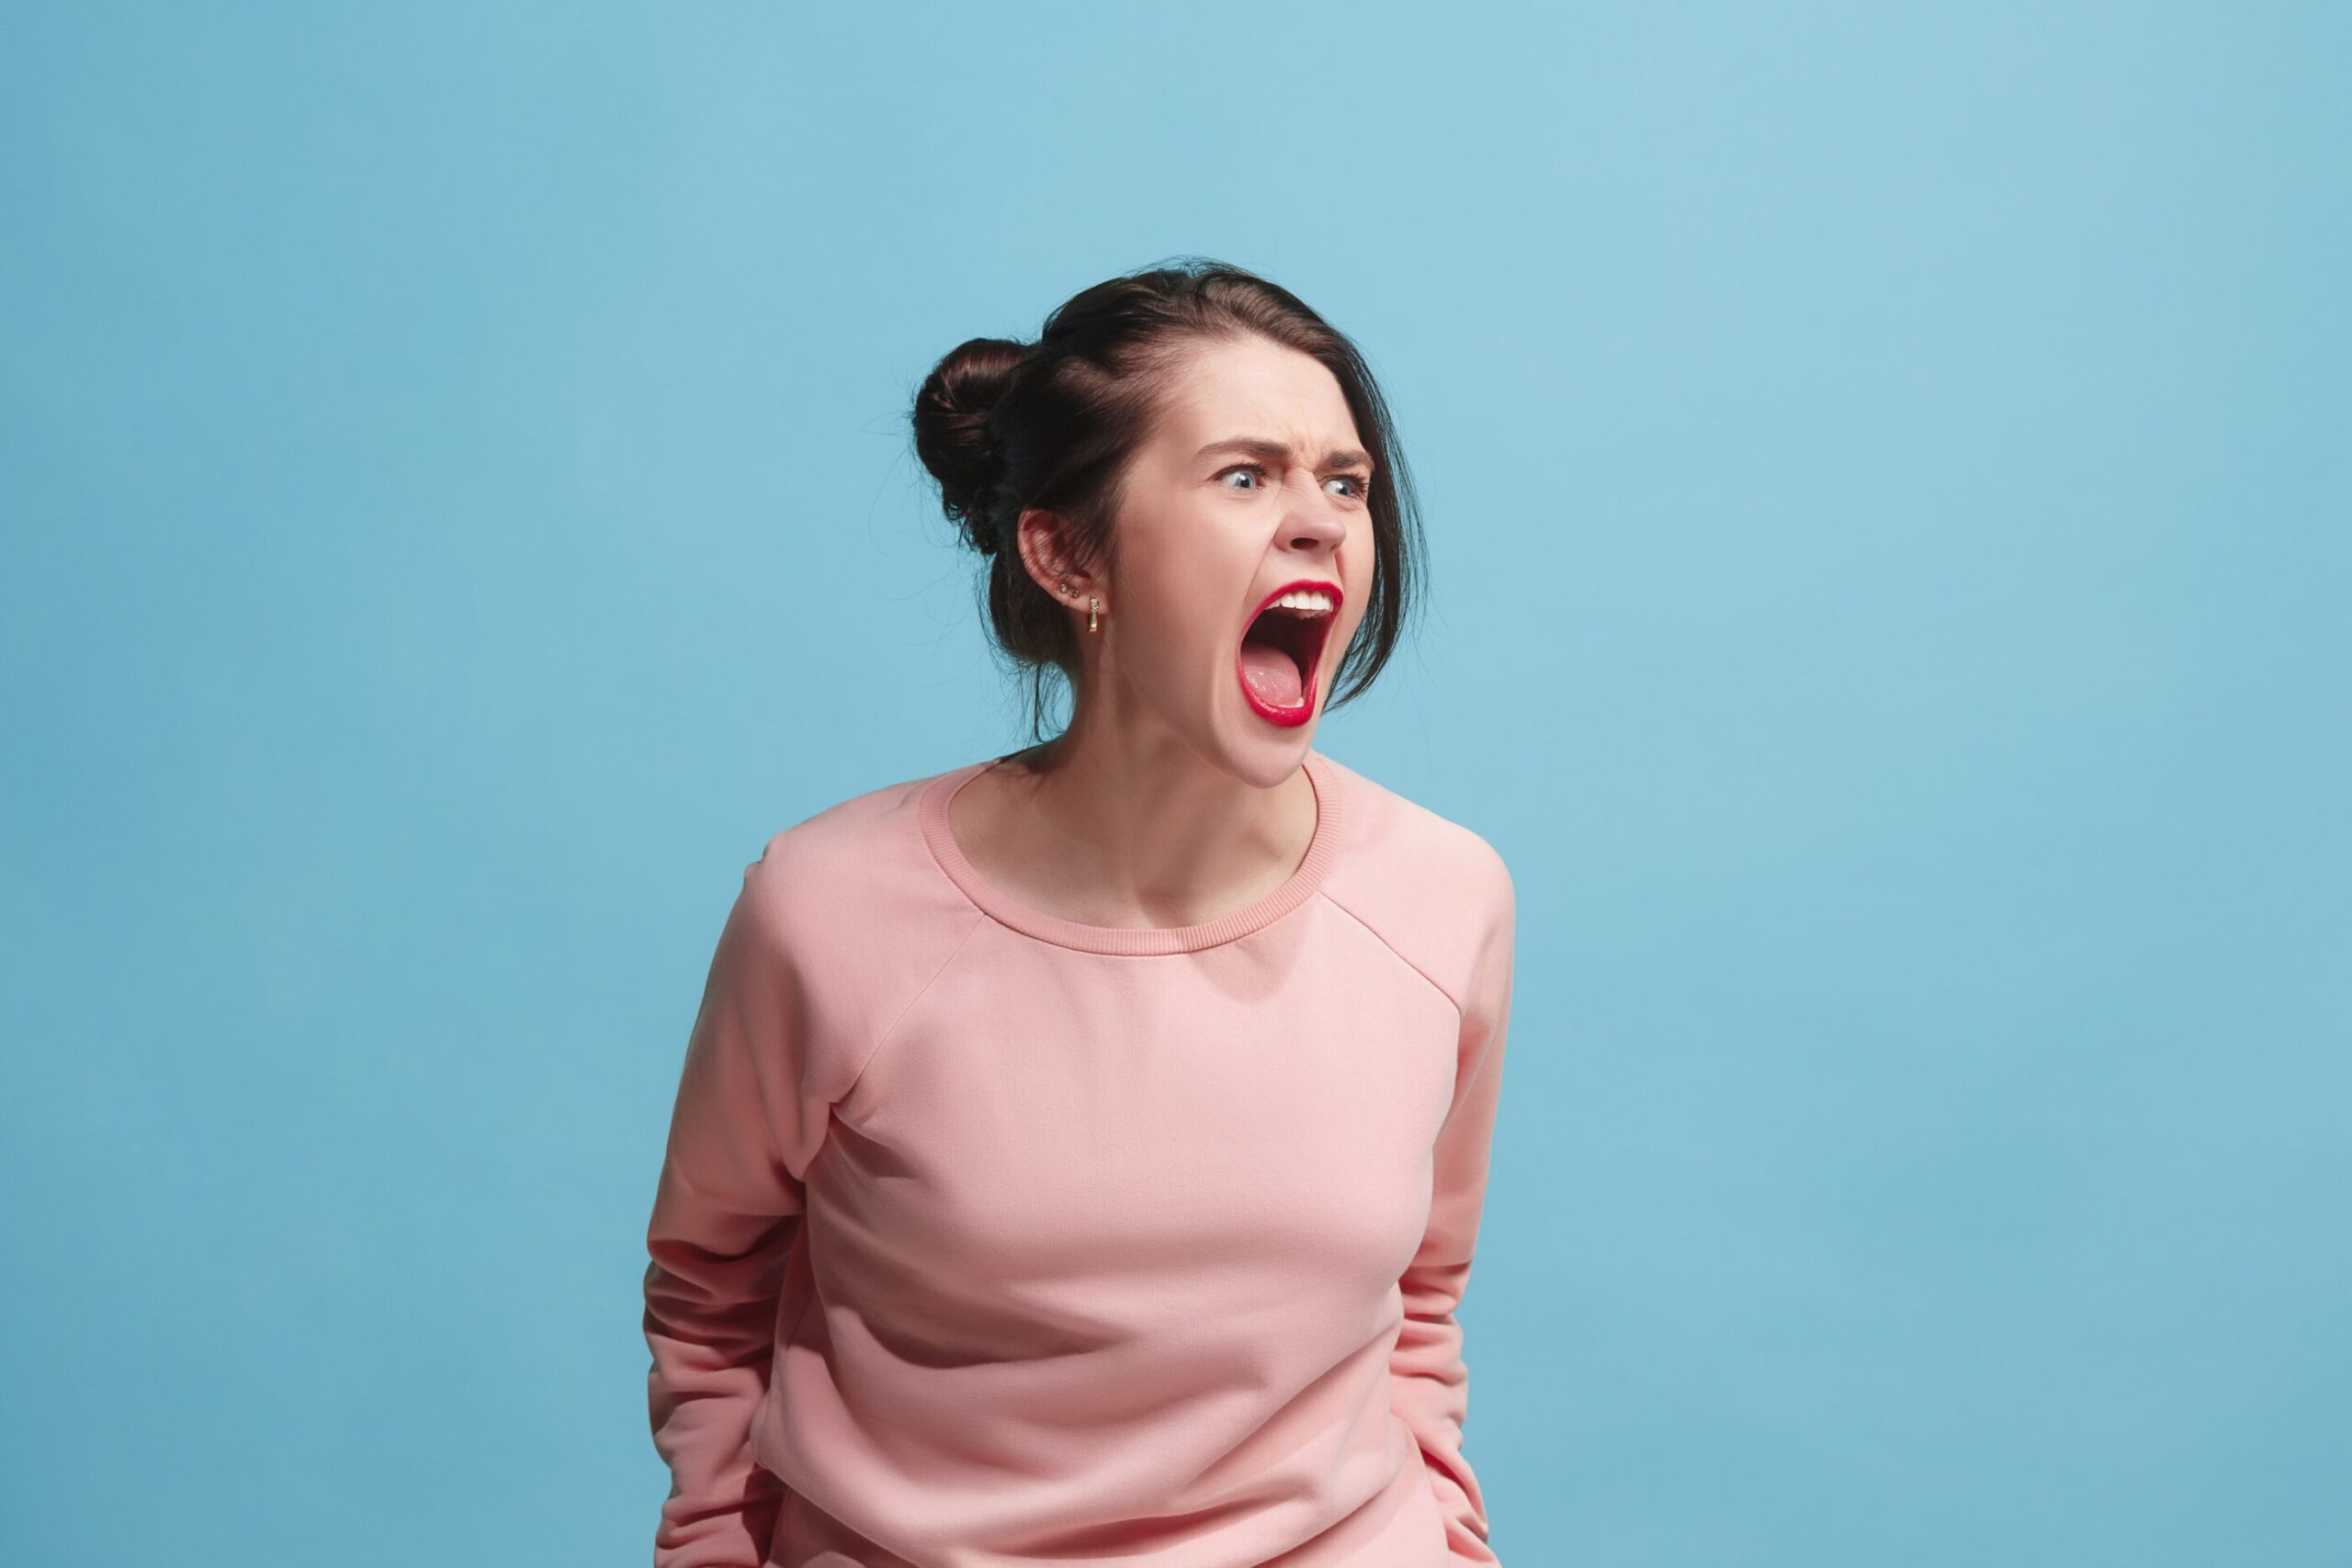 Woman having an uncontrolled emotional outburst